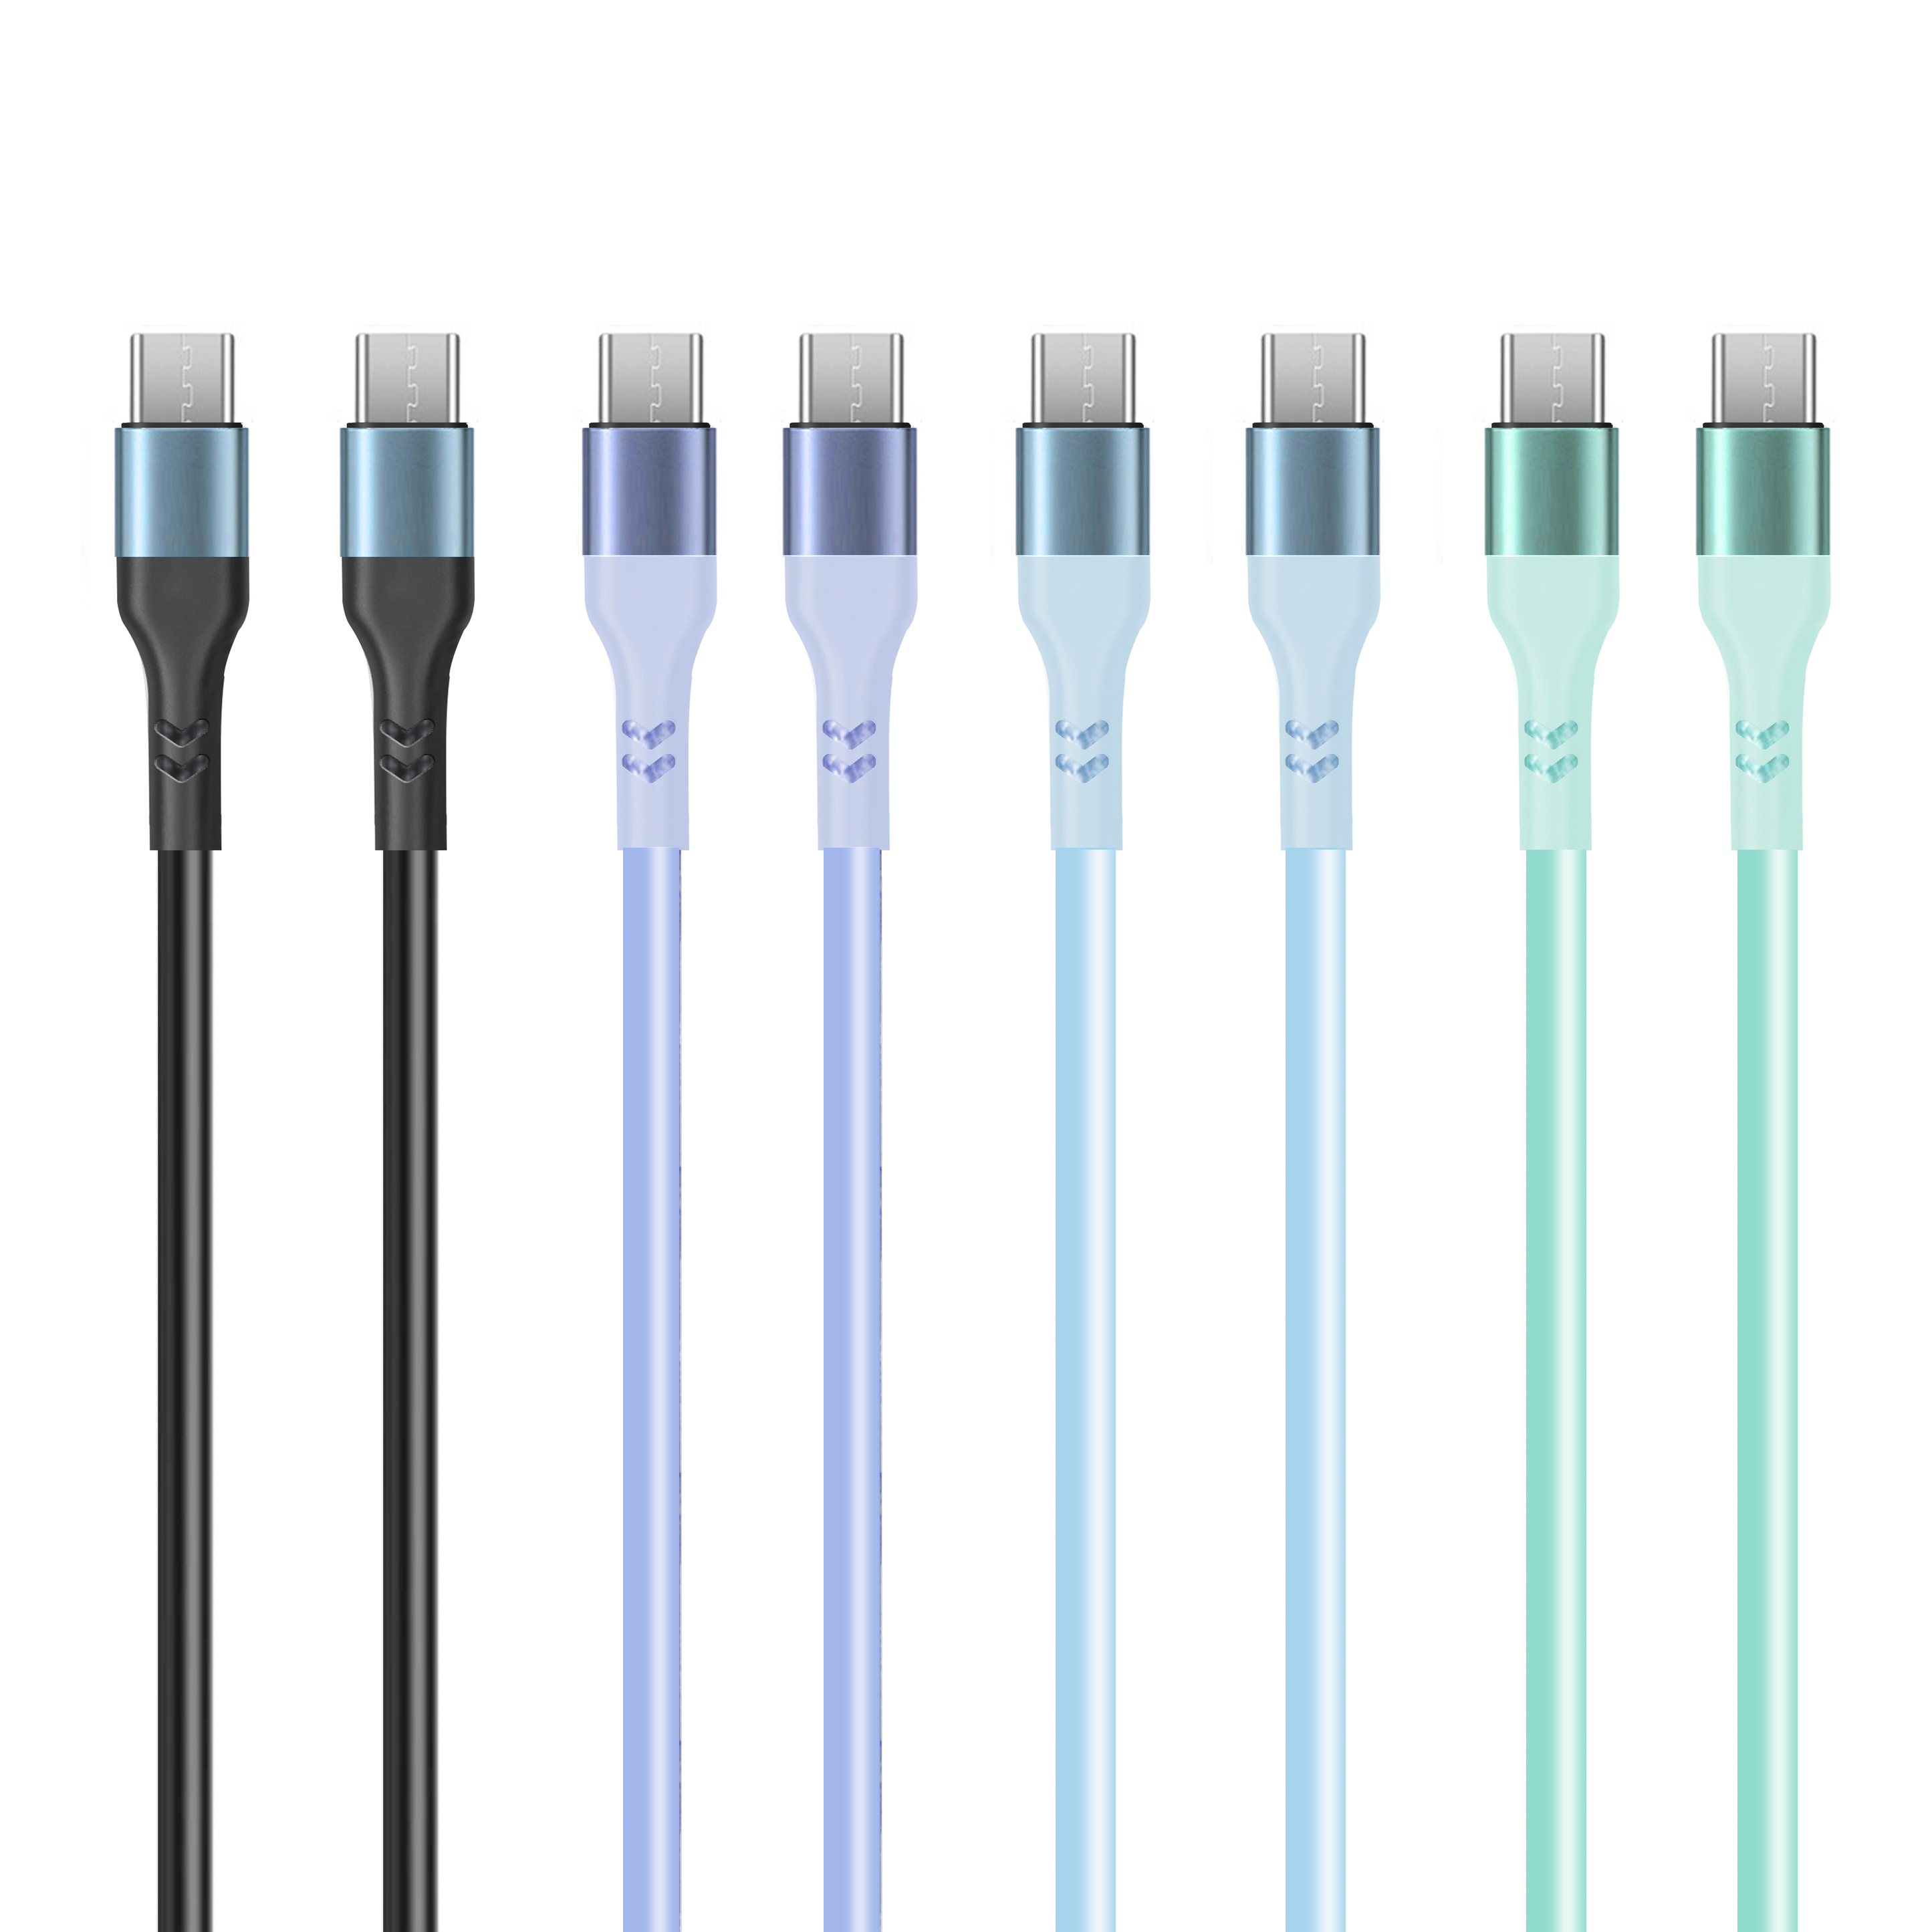 Do you know how to distinguish the advantages and disadvantages of TYPE C Data Cable?